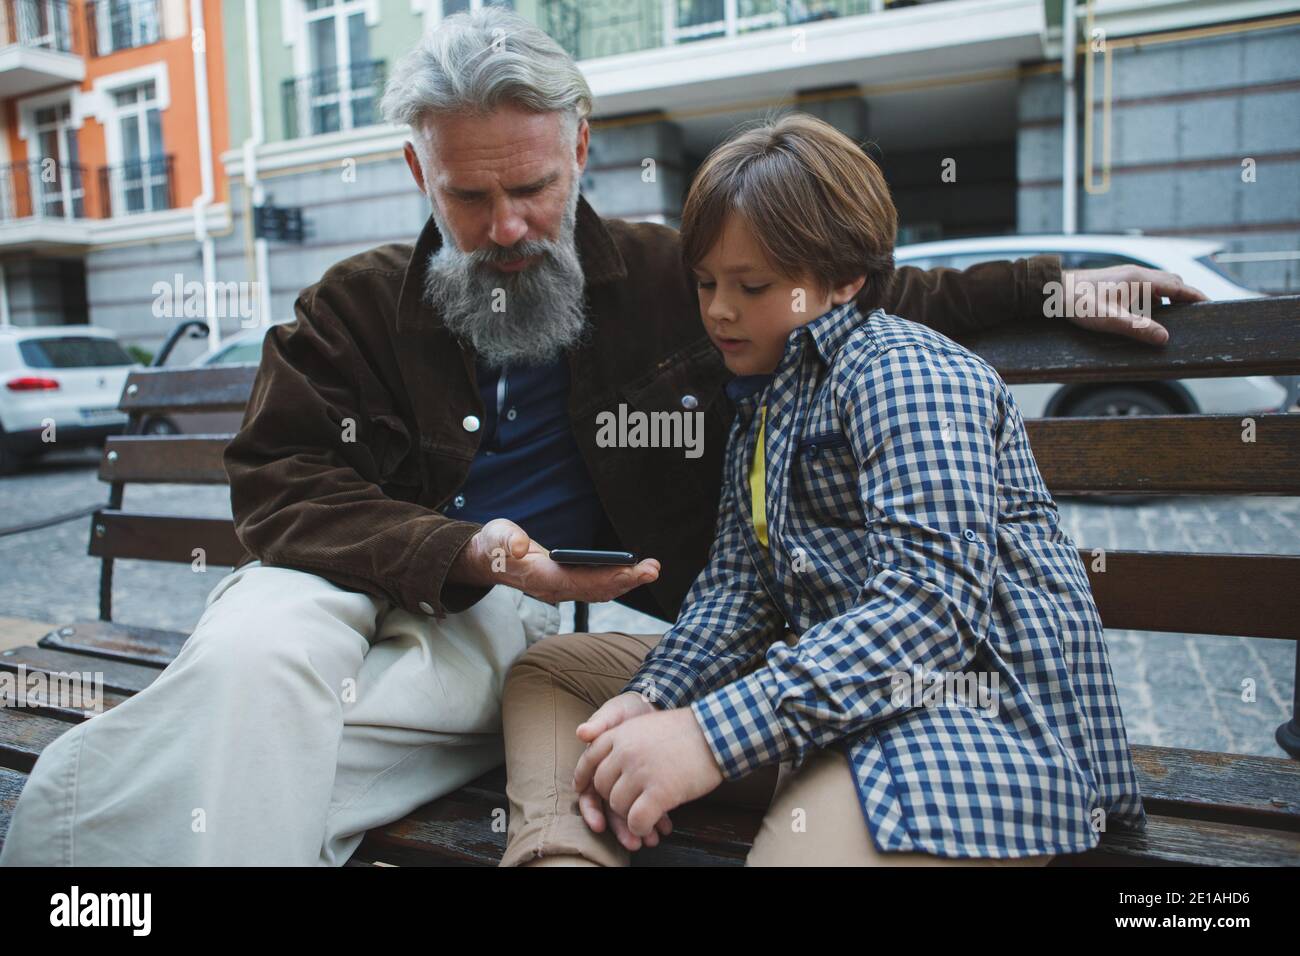 Elderly man using smart phone with the help of his young grandson, sitting on a bench in the city Stock Photo